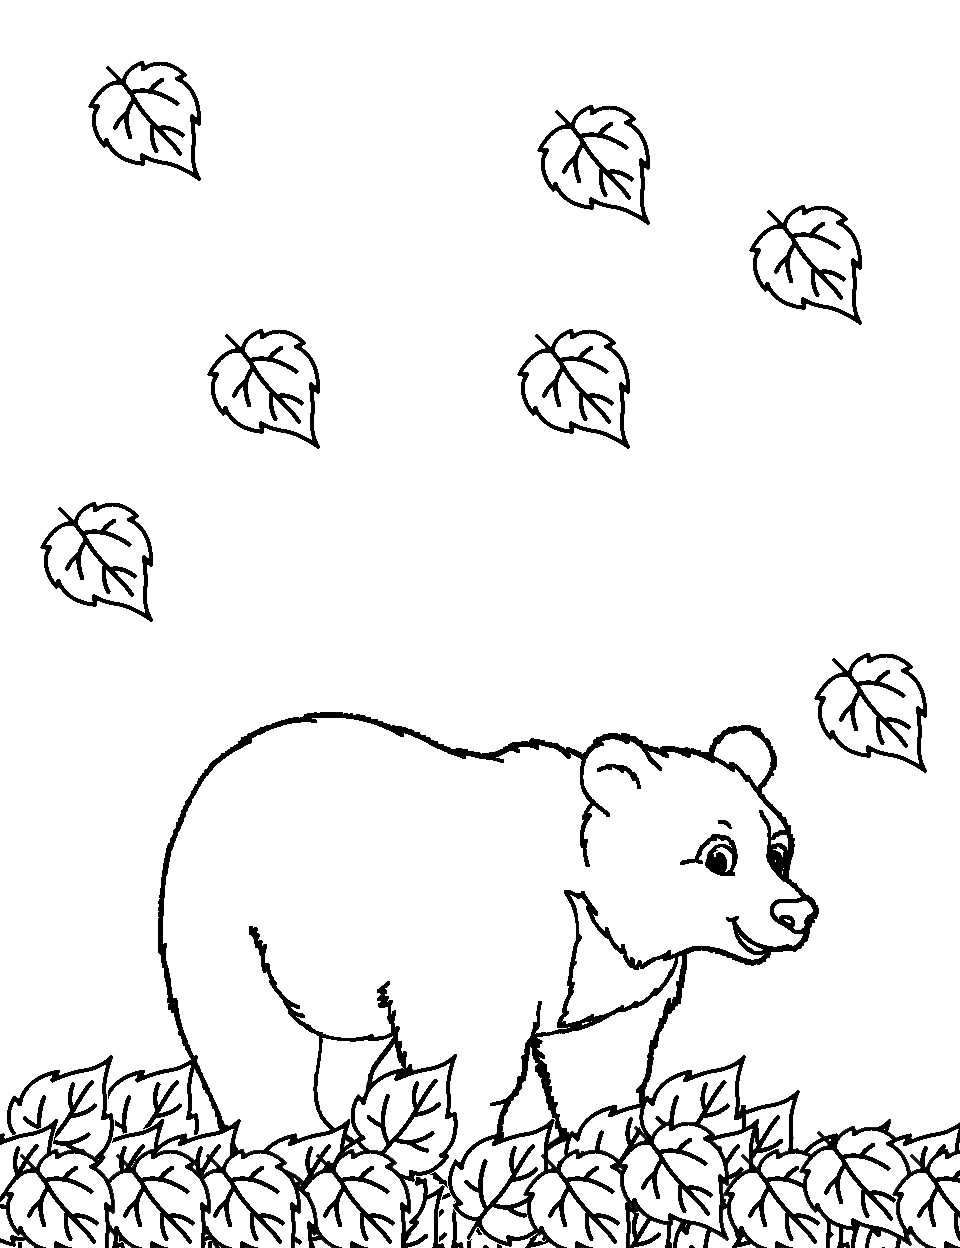 Bear with Fall Leaves Coloring Page - A bear playing amidst autumn leaves, a seasonal treat.